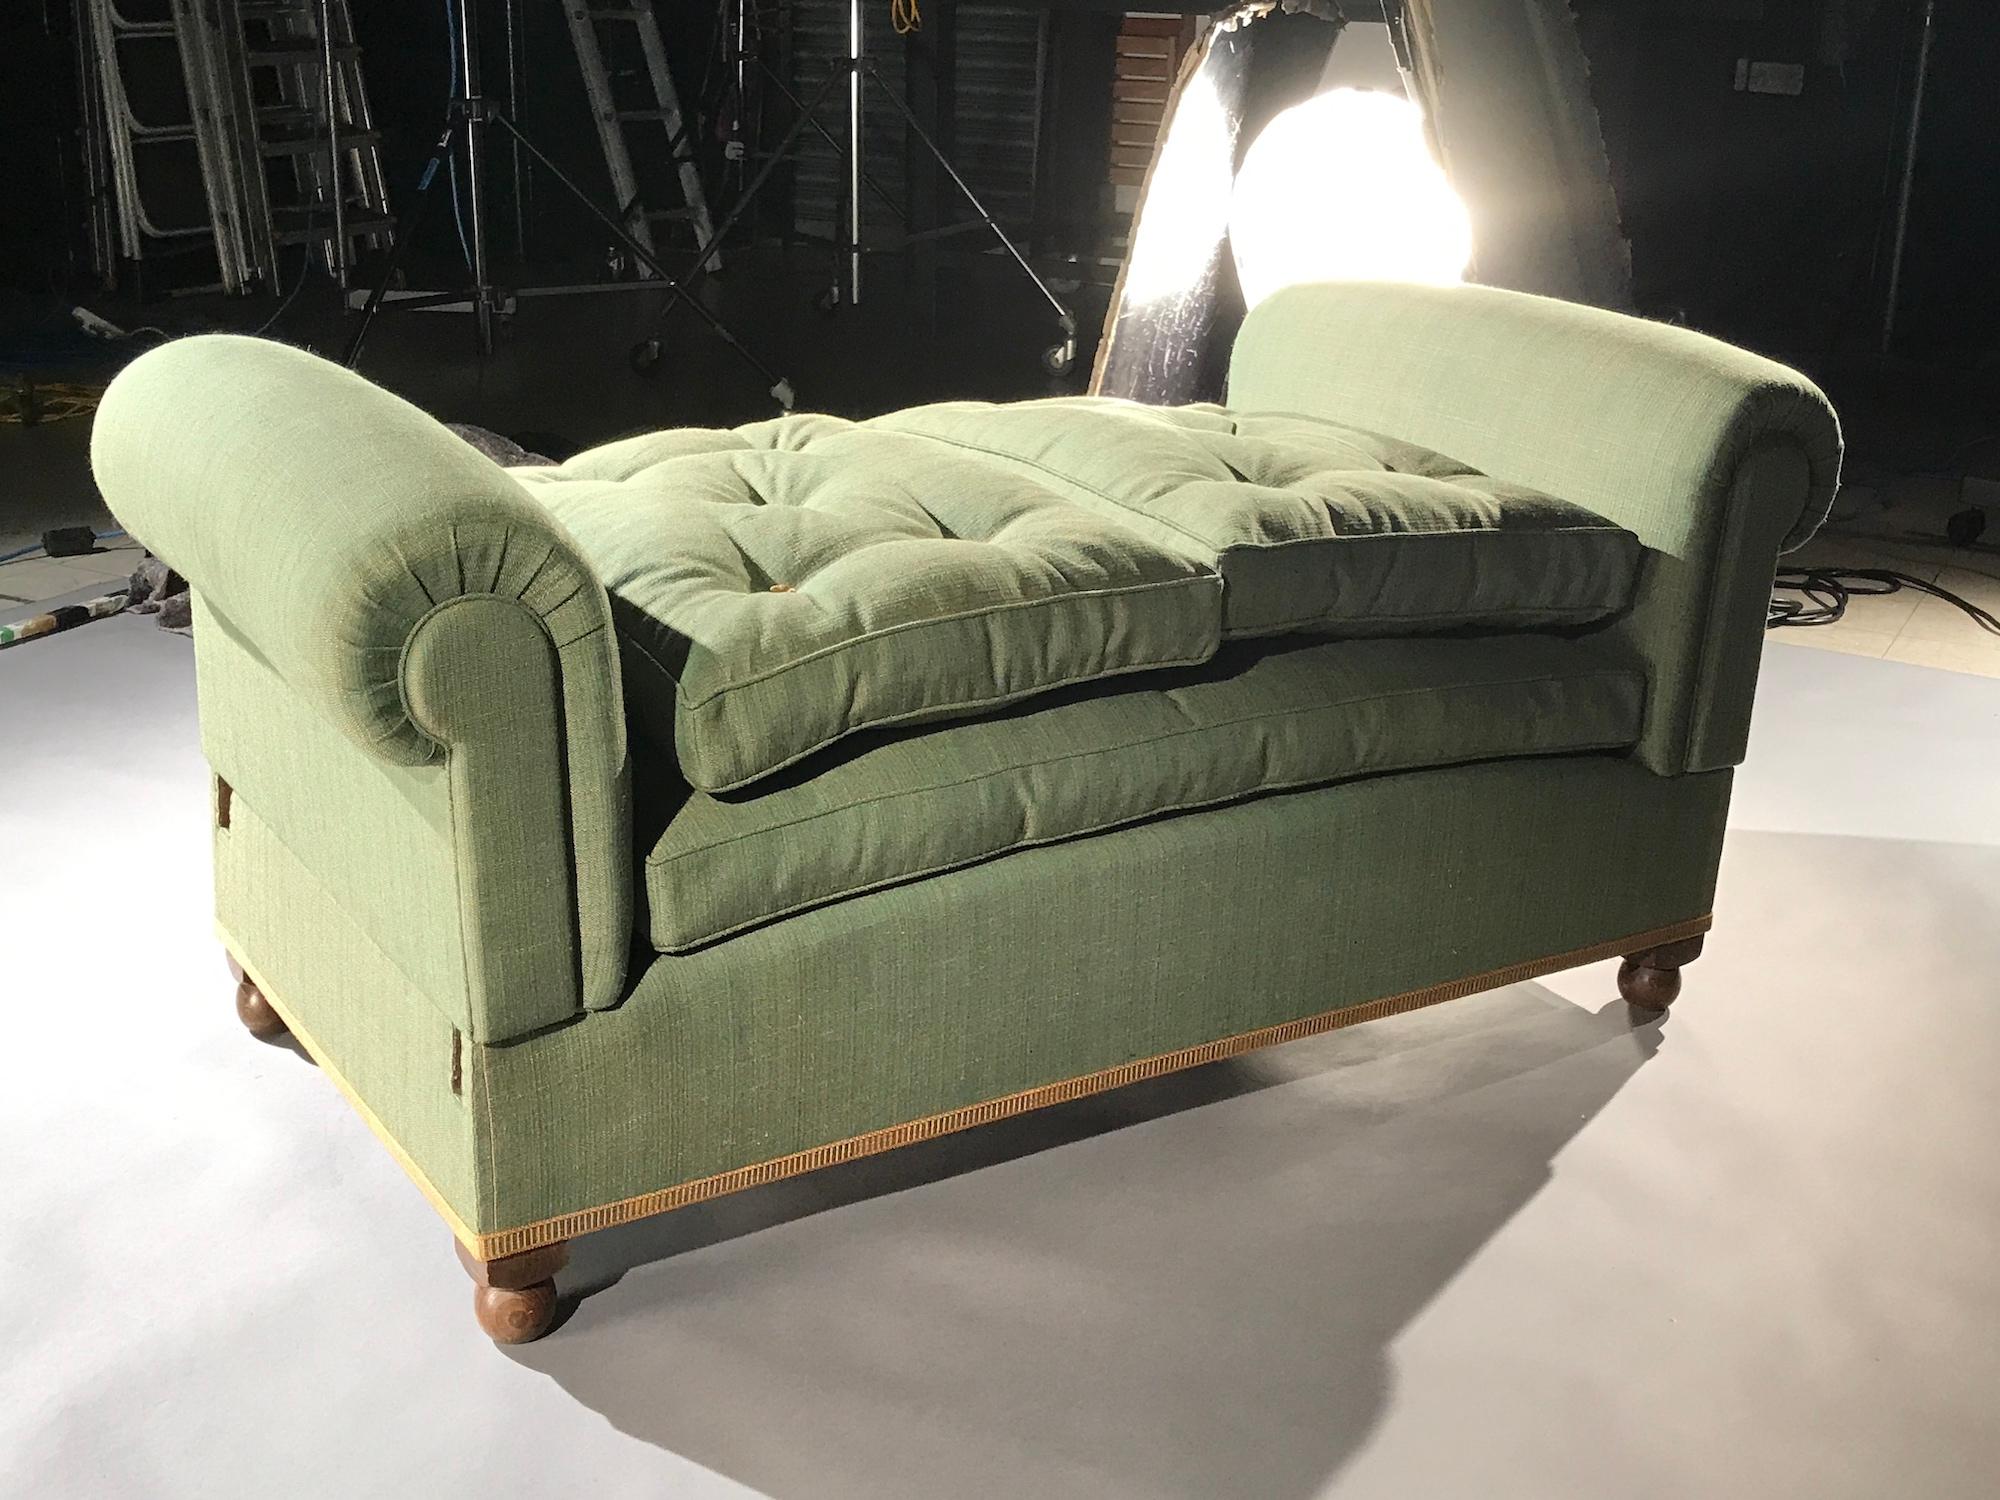 Art Deco Daybed Settee Window-Seat Single-Bed Sofa-Bed Reclining Linen Green Gold Recline For Sale